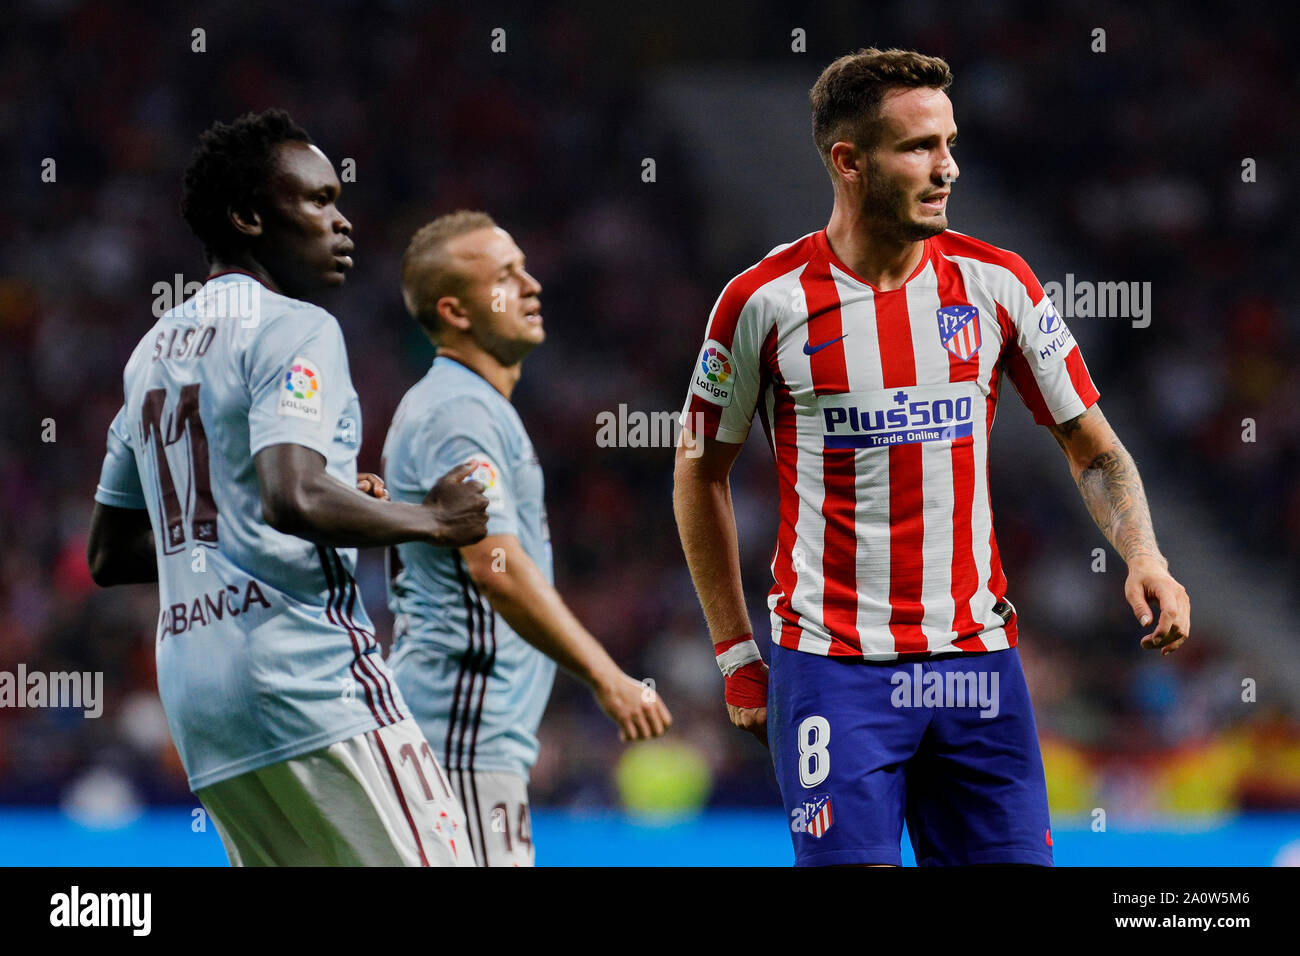 Madrid, Spain. 21st Sep, 2019. Saul Niguez of Atletico de Madrid and Pione Sisto of Real Club Celta de Vigo are seen in action during the La Liga match between Atletico de Madrid and Real Club Celta de Vigo at Wanda Metropolitano Stadium in Madrid.( Final score; Atletico de Madrid 0:0 Real Club Celta de Vigo) Credit: SOPA Images Limited/Alamy Live News Stock Photo